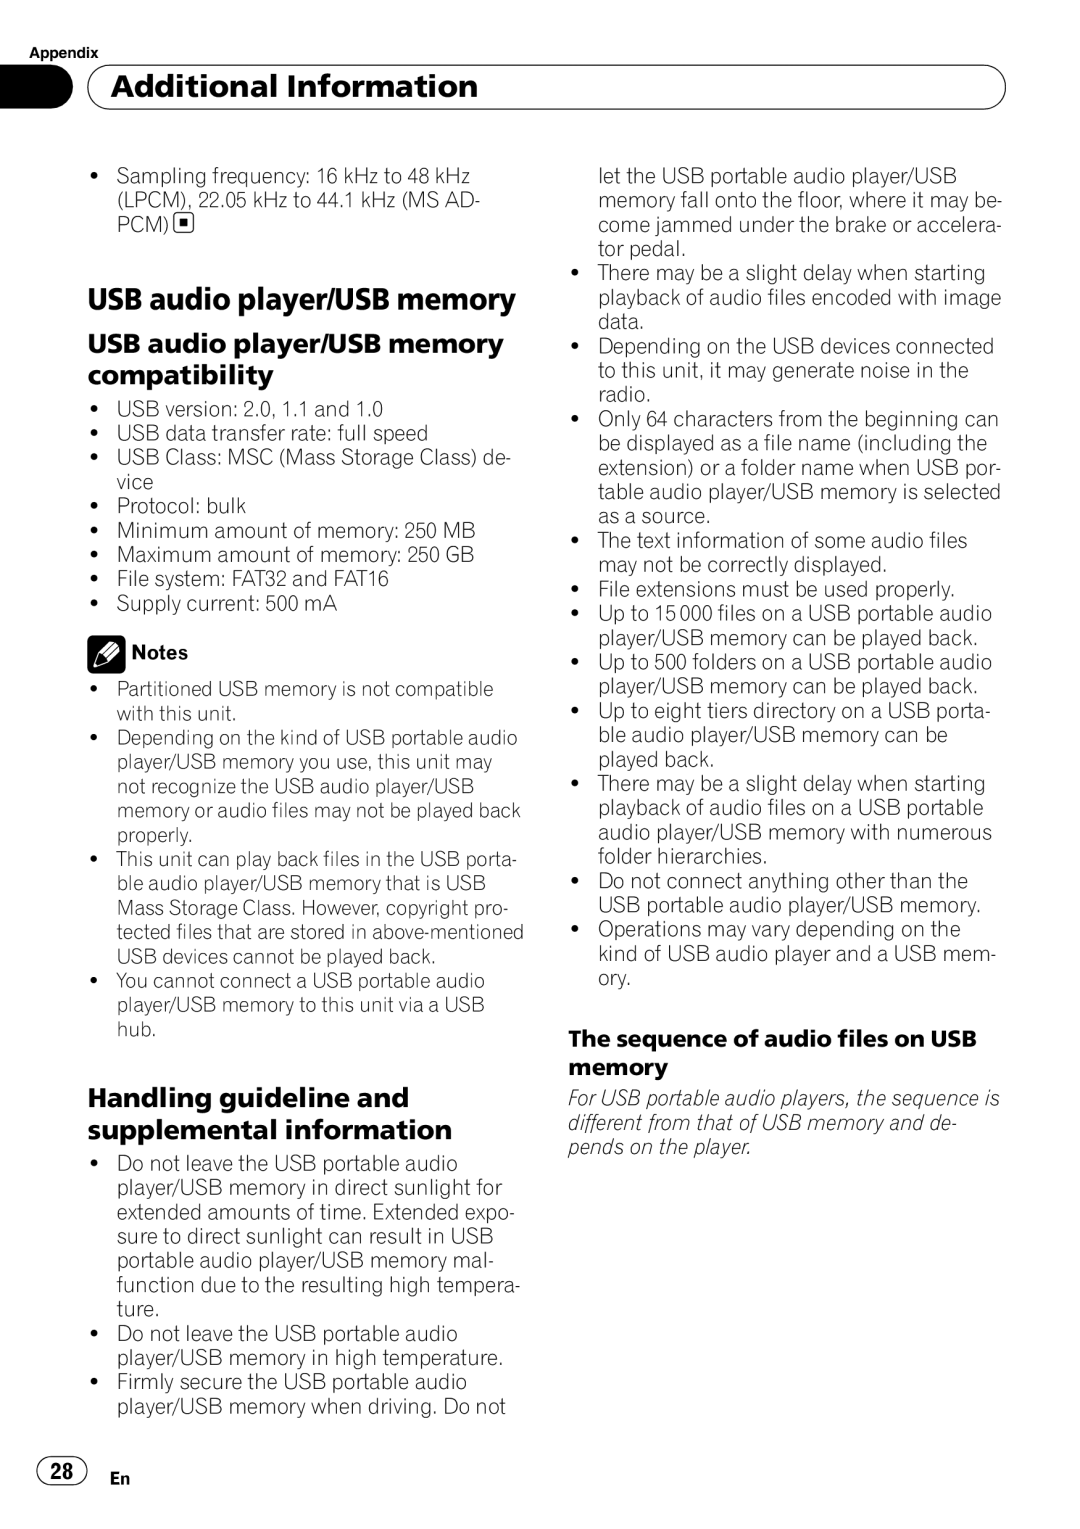 Pioneer DEH-3050UB USB audio player/USB memory compatibility, Handling guideline and supplemental information 